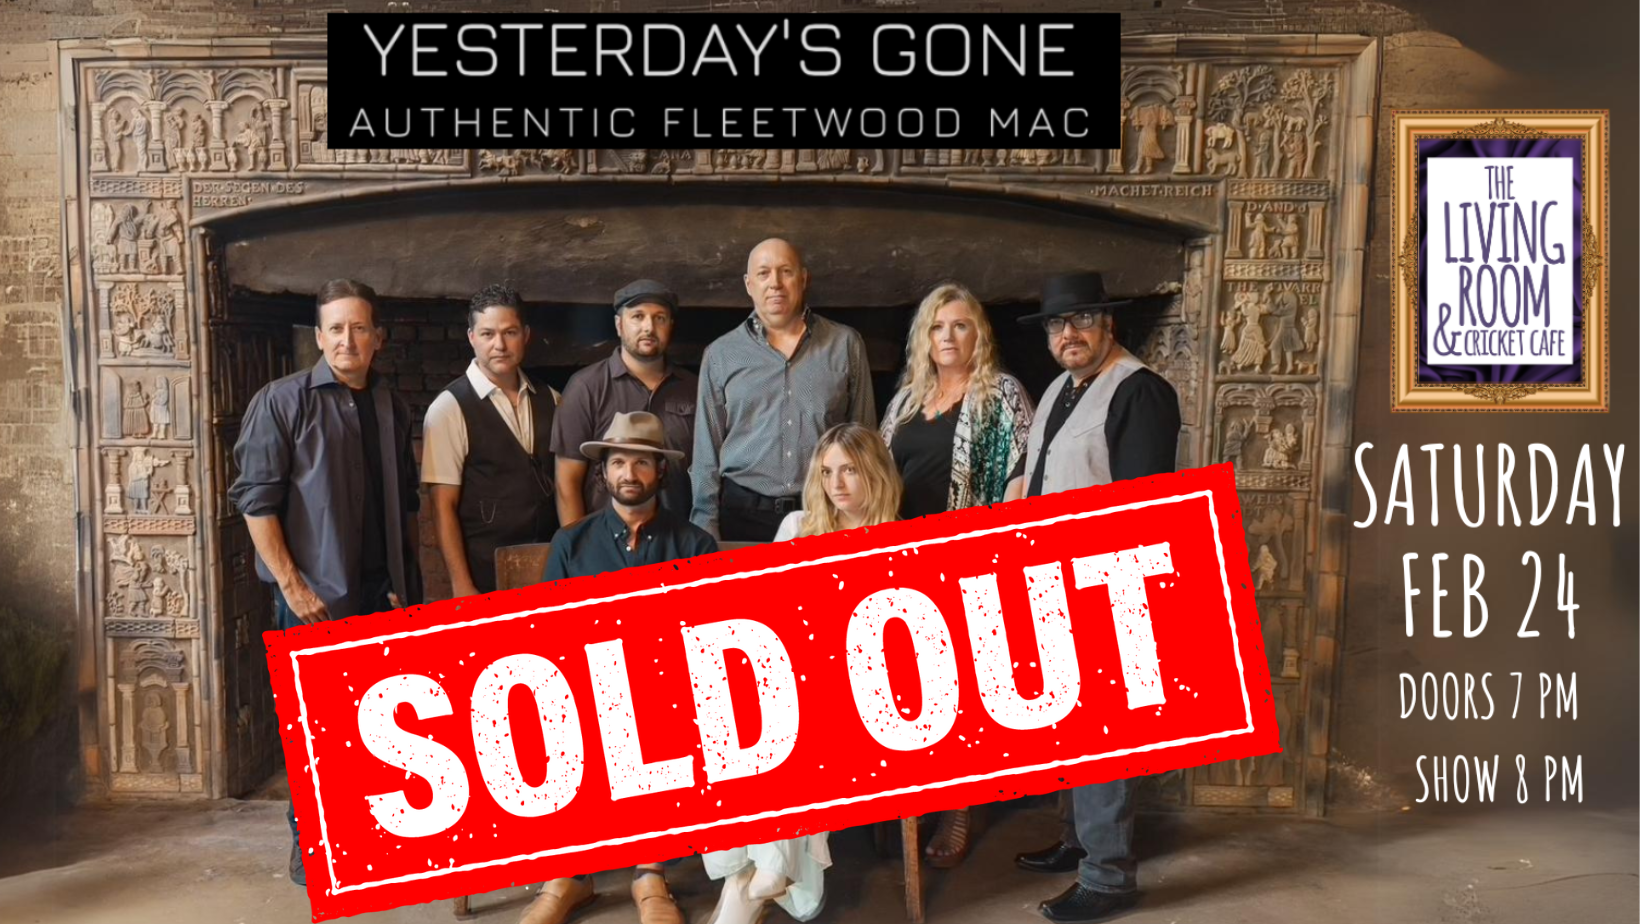 SAT. FEB. 24: Yesterday's Gone: Tribute To Fleetwood Mac